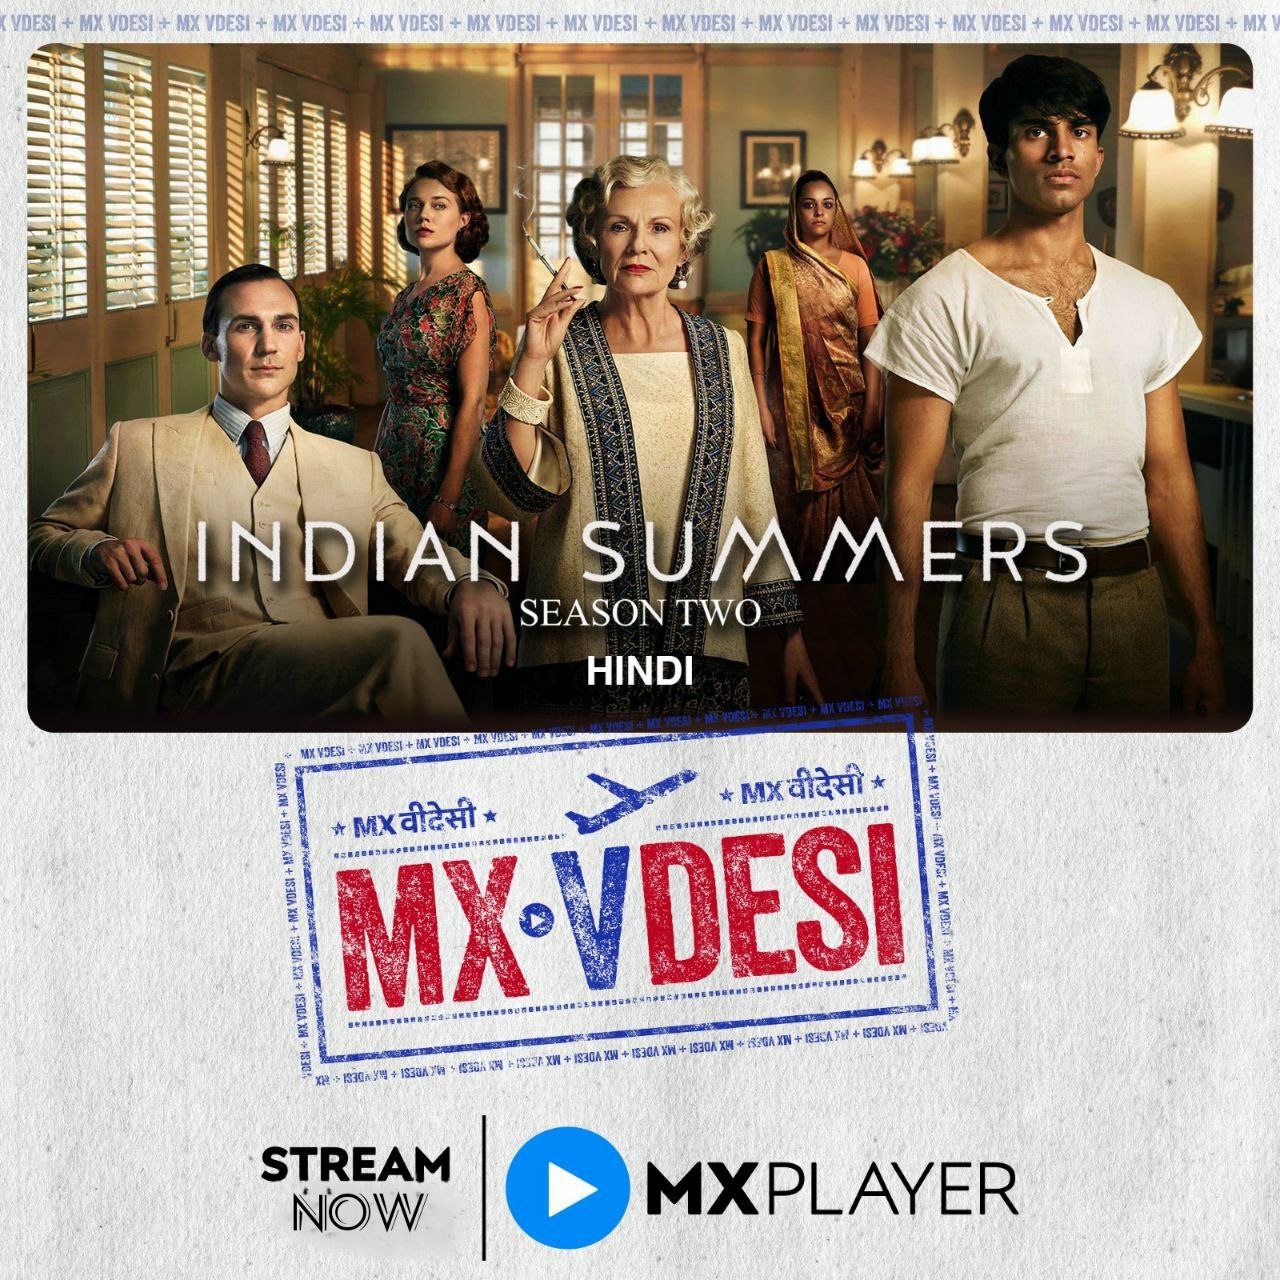 Indian Summers (2015-16) – A British Period Drama TV Series